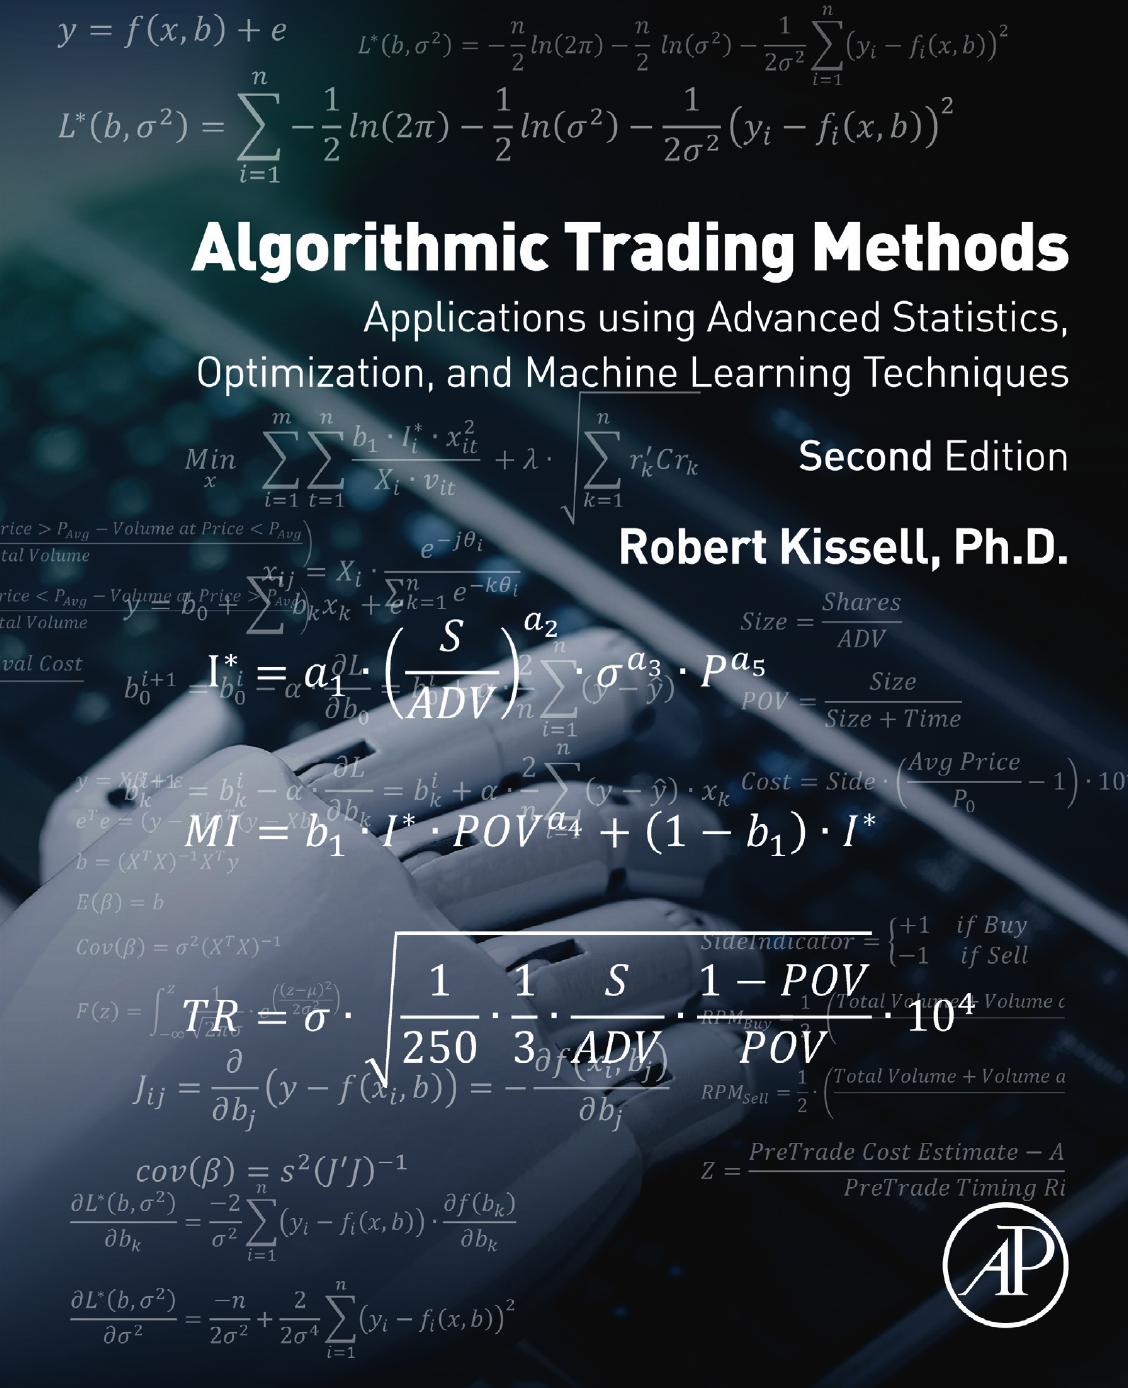 Algorithmic Trading Methods: Applications using Advanced Statistics, Optimization, and Machine Learning Techniques